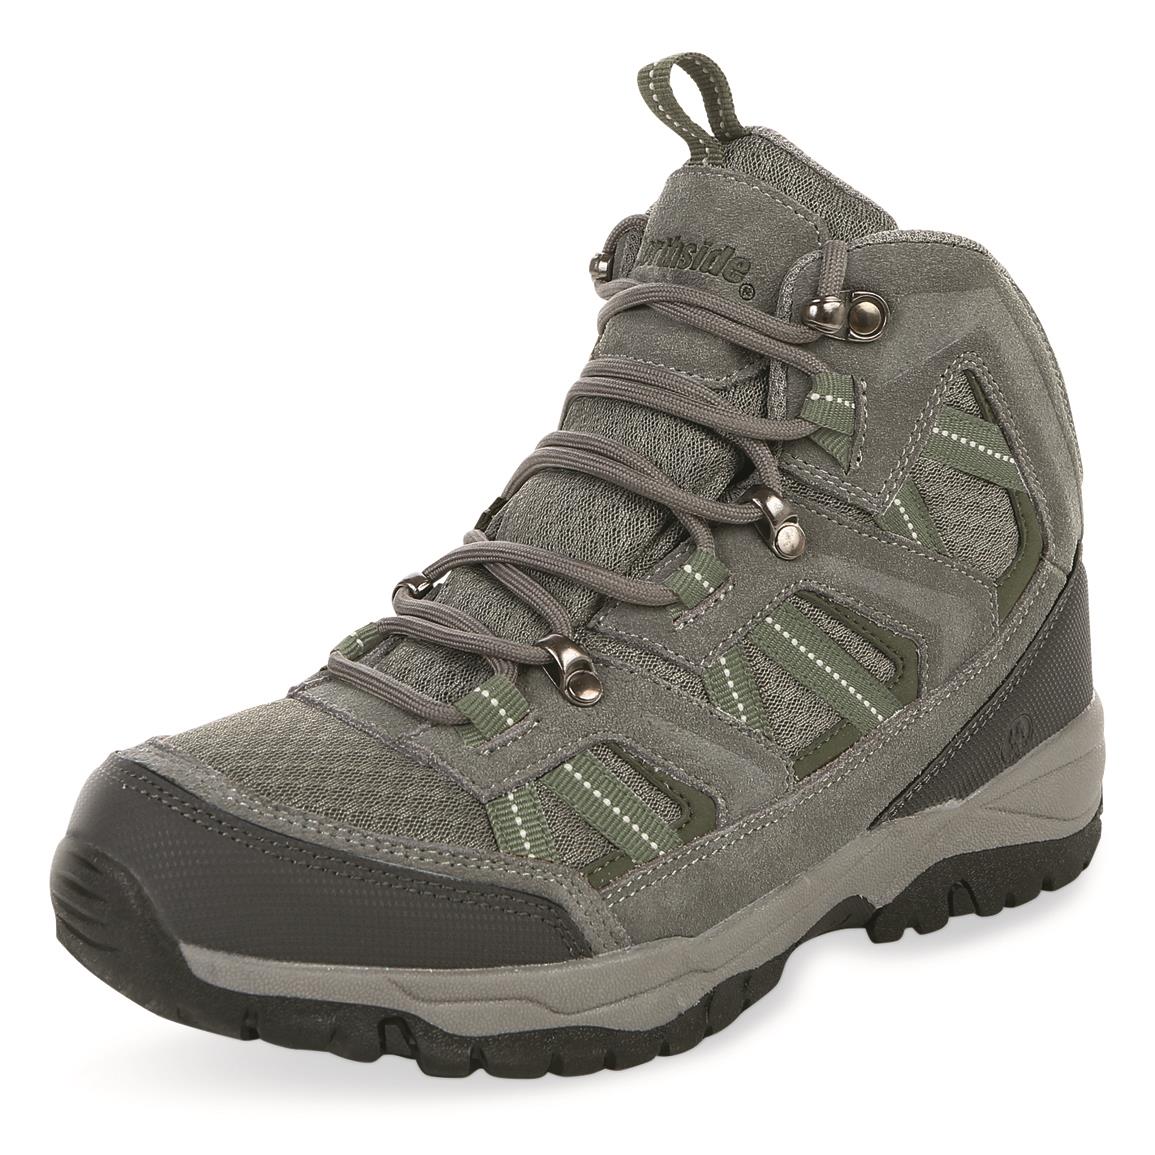 Northside Women's Arlow Canyon Mid Hiking Boots, Gray/sage